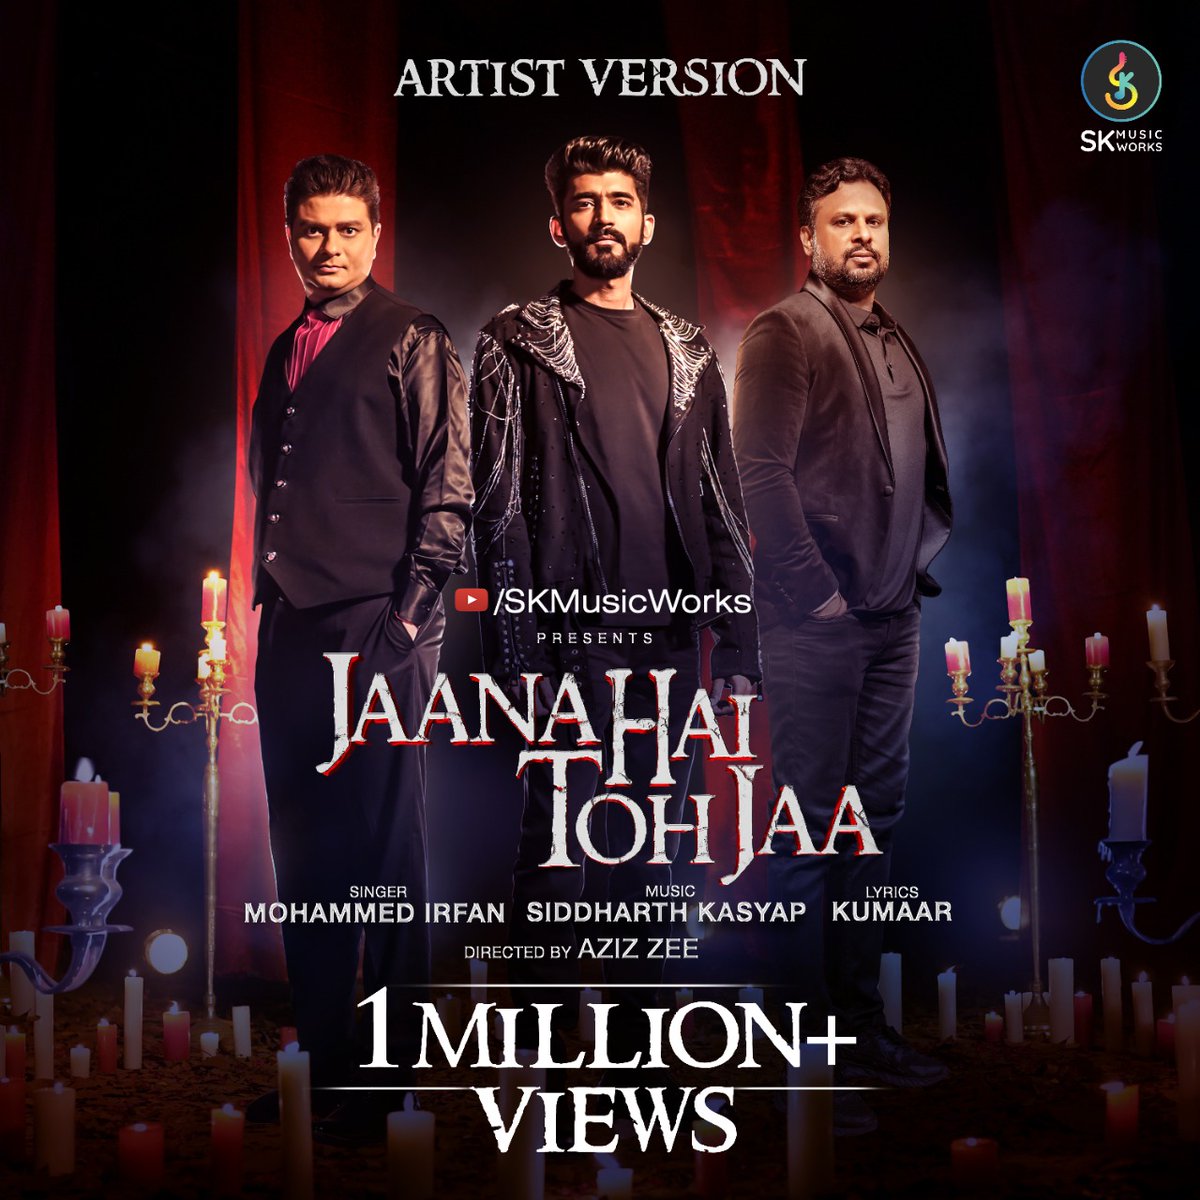 ARTIST VERSION has hit 1M!! This wouldn't be possible without your love, support, and the beautiful versions from our music enthusiast @skmusicworks @siddharthkasyap @Md_Irfan17 @kumaarofficial #JHTJ #SkMusicWorks #ArtistVersion #unplugged #lovesong #heartbreak #explore